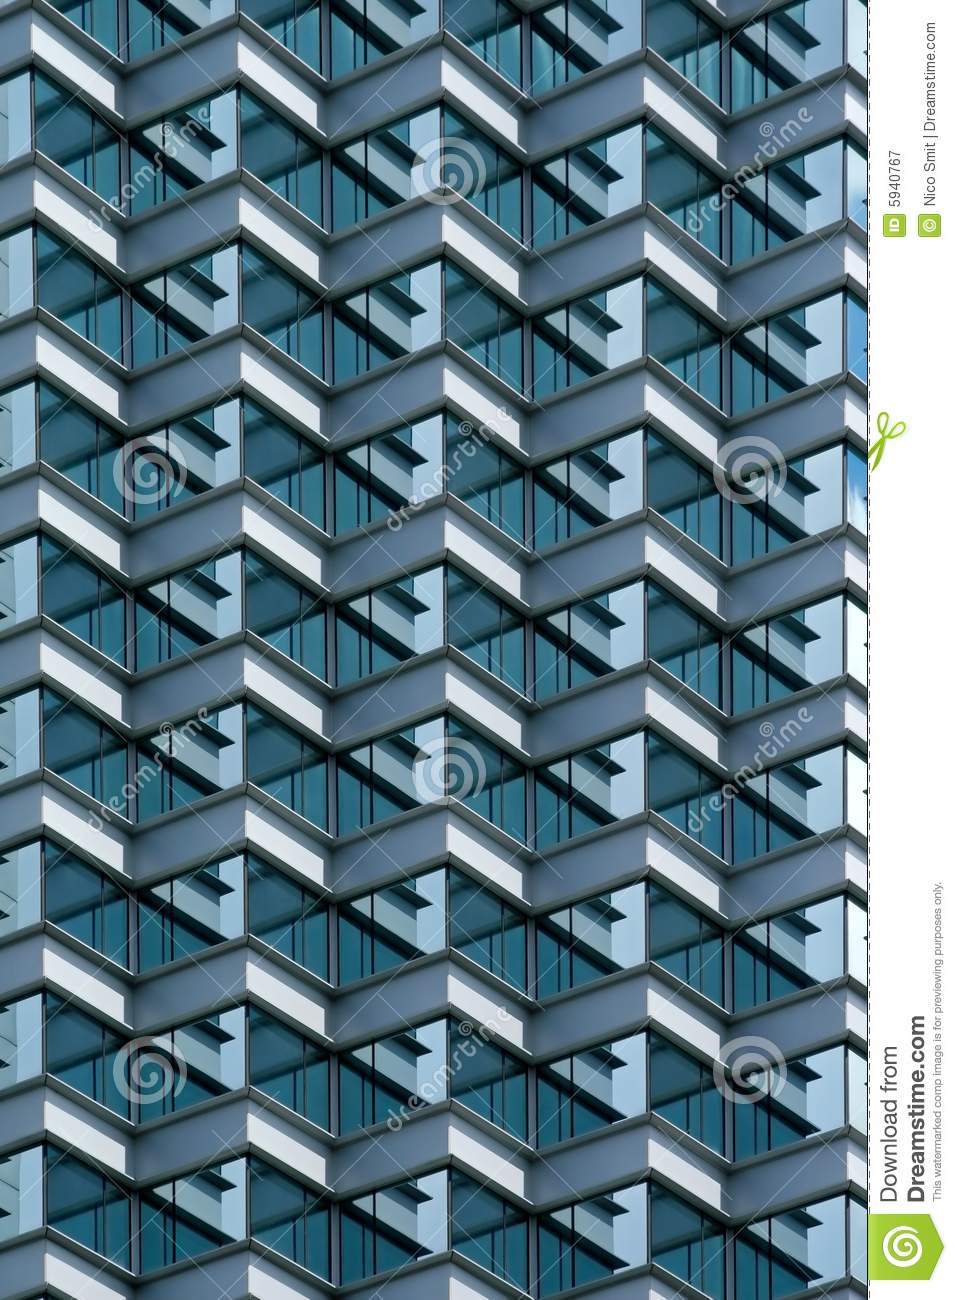 Abstract Architectural Pattern